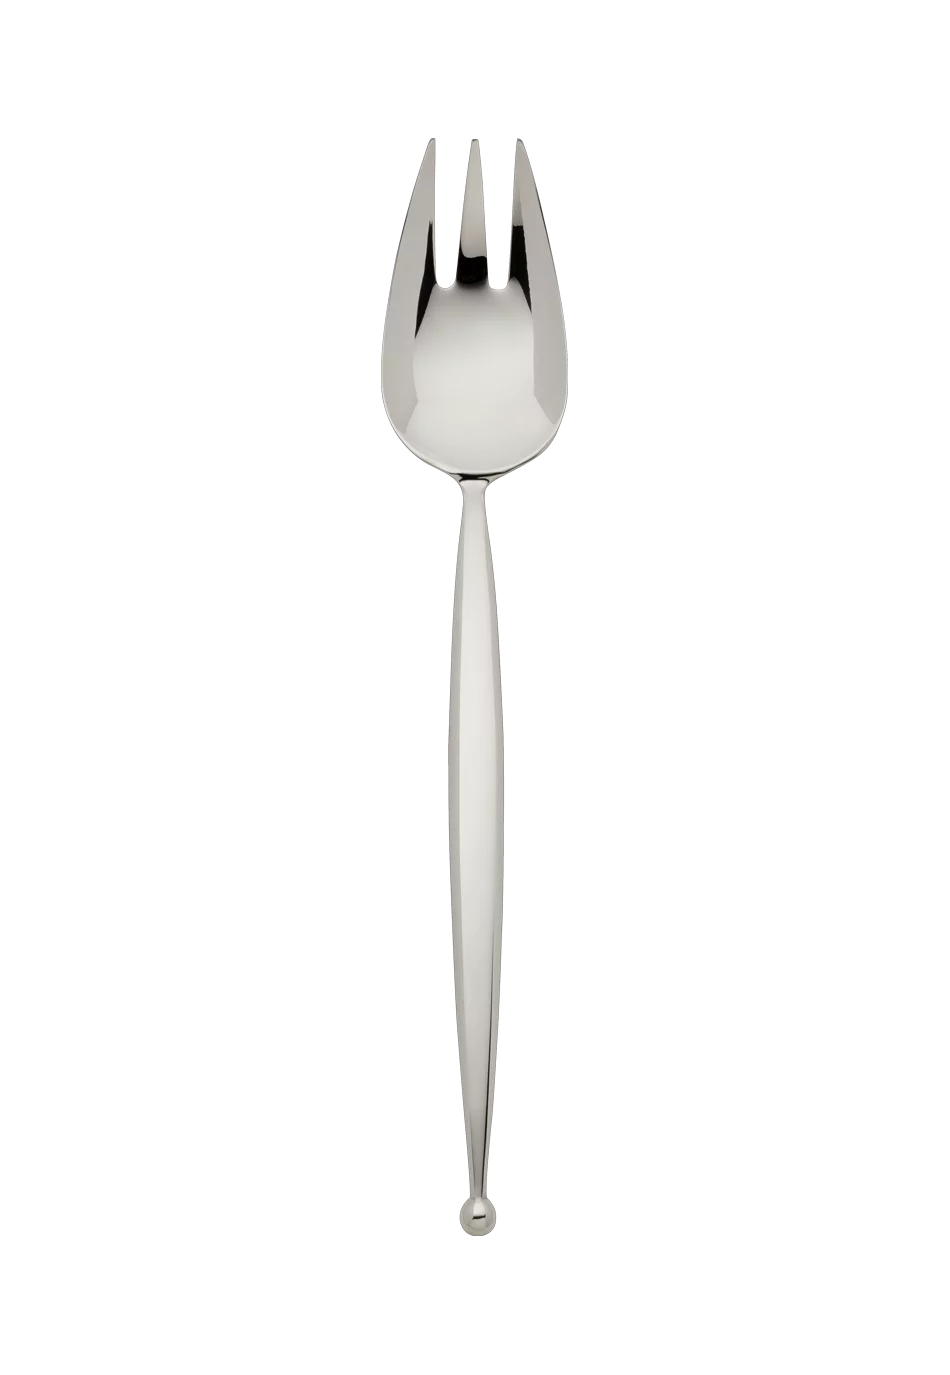 Gio Vegetable Fork (150g massive silverplated)